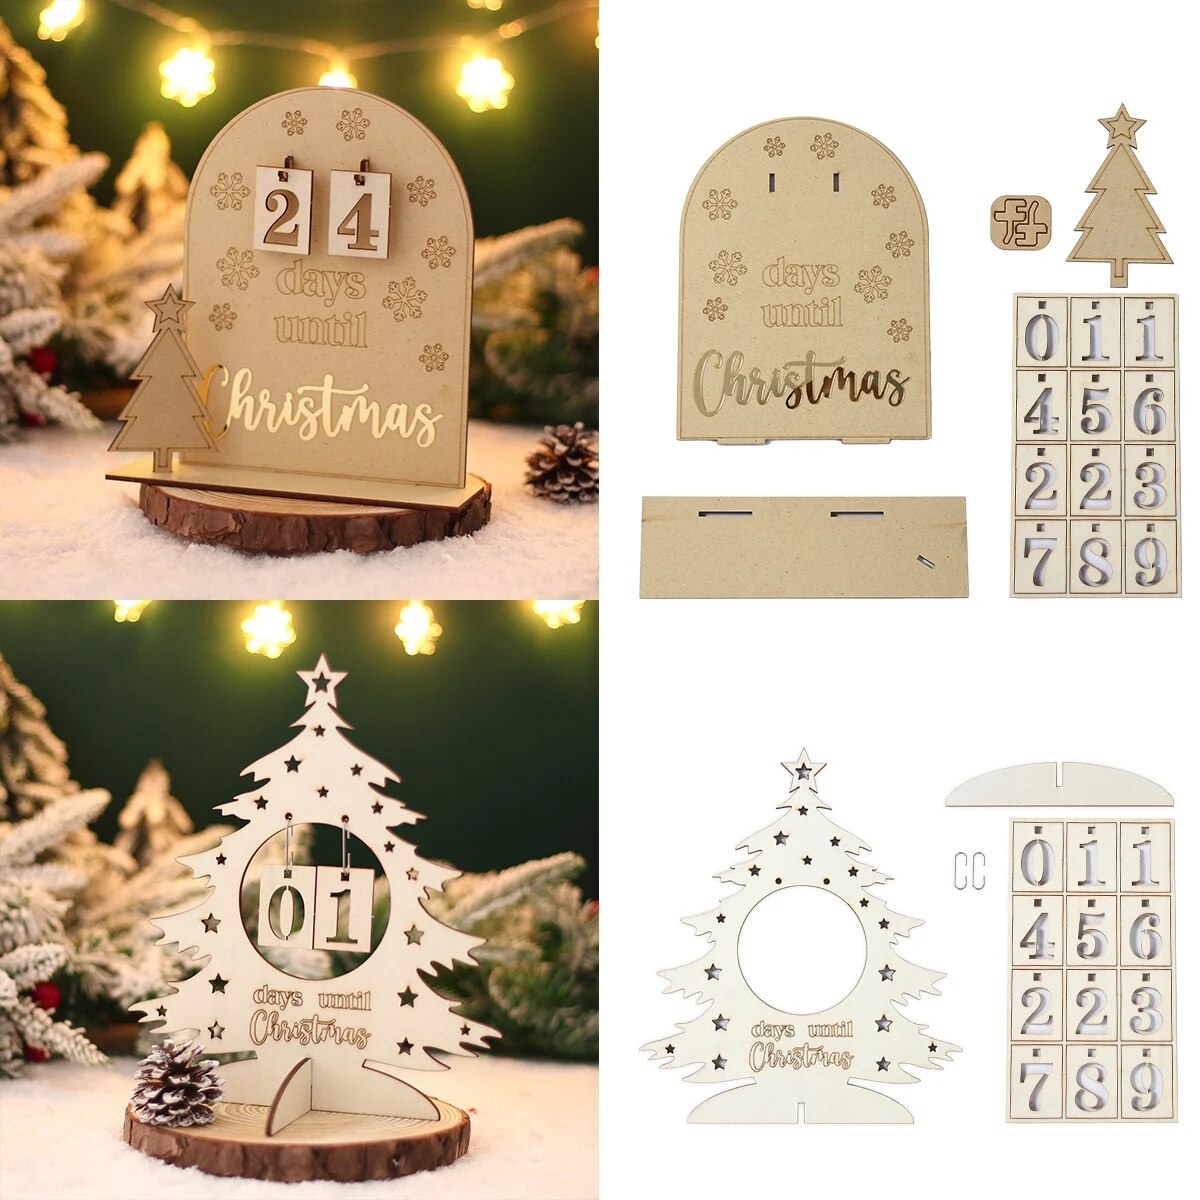 Wooden Xmas Tree House Advent Calendar: Countdown Table Ornament for Christmas Home Decor and New Year Presents